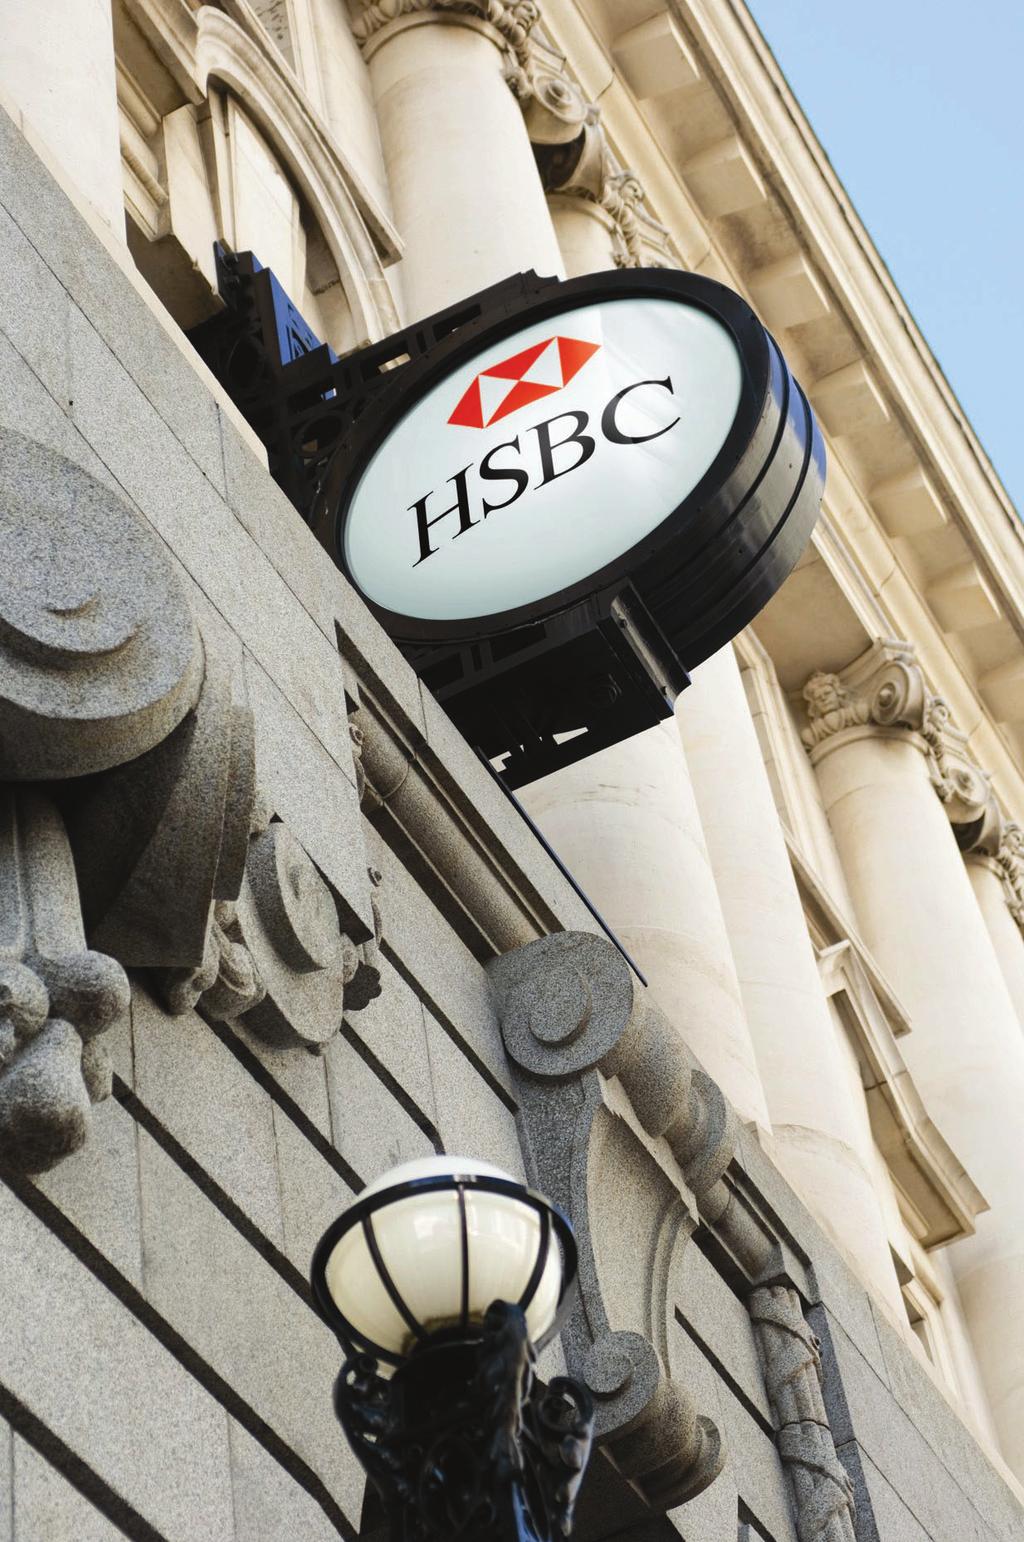 4 About HSBC HSBC Investments New Zealand Limited, established in 2007, is the issuer and Manager of the HSBC Cash Fund ( the Cash Fund ) and the HSBC Term Fund ( the Term Fund ) and is ultimately